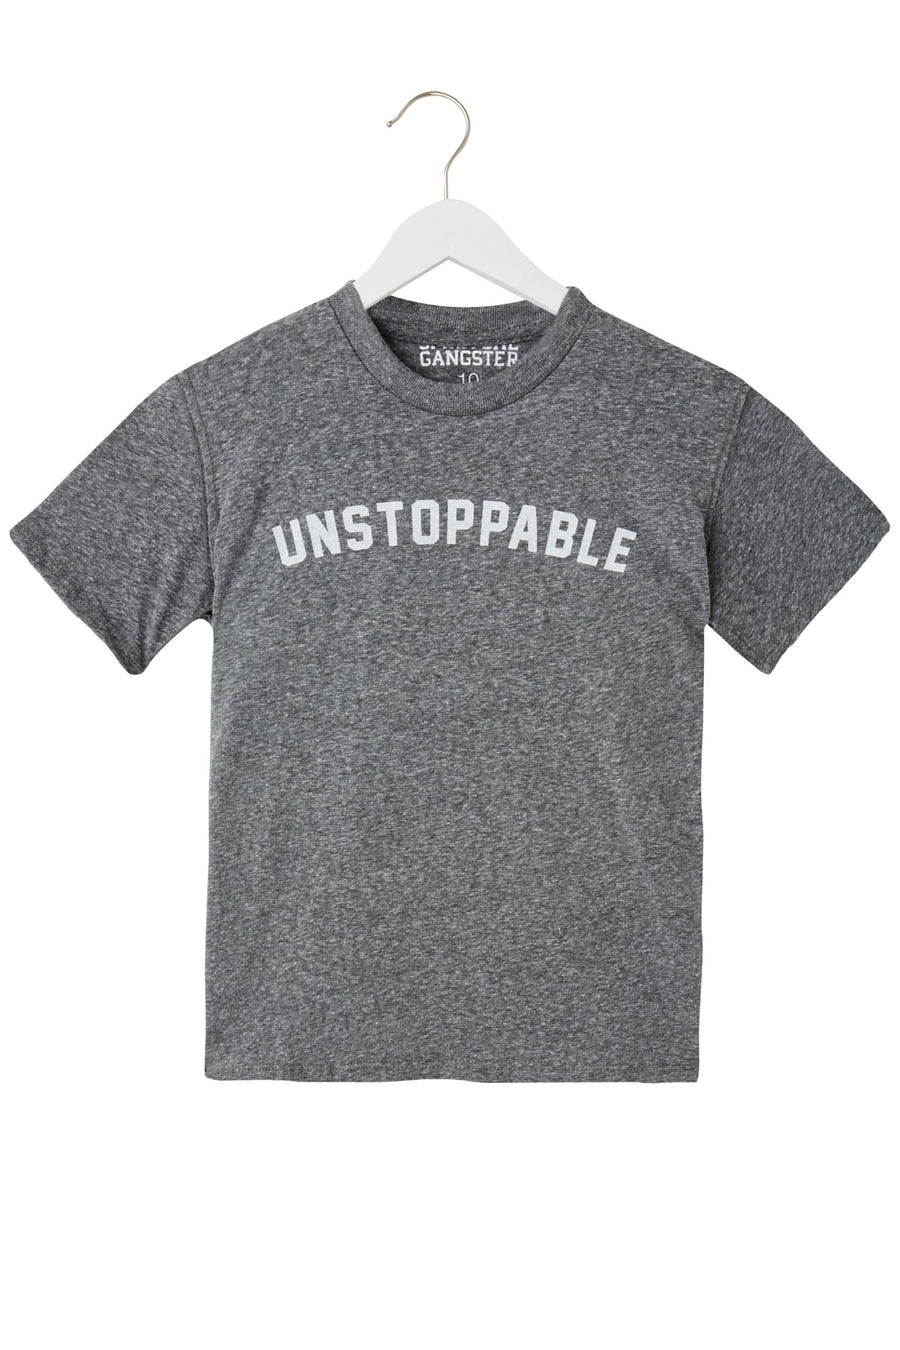 Unstoppable Crew Tee Spiritual Gangster